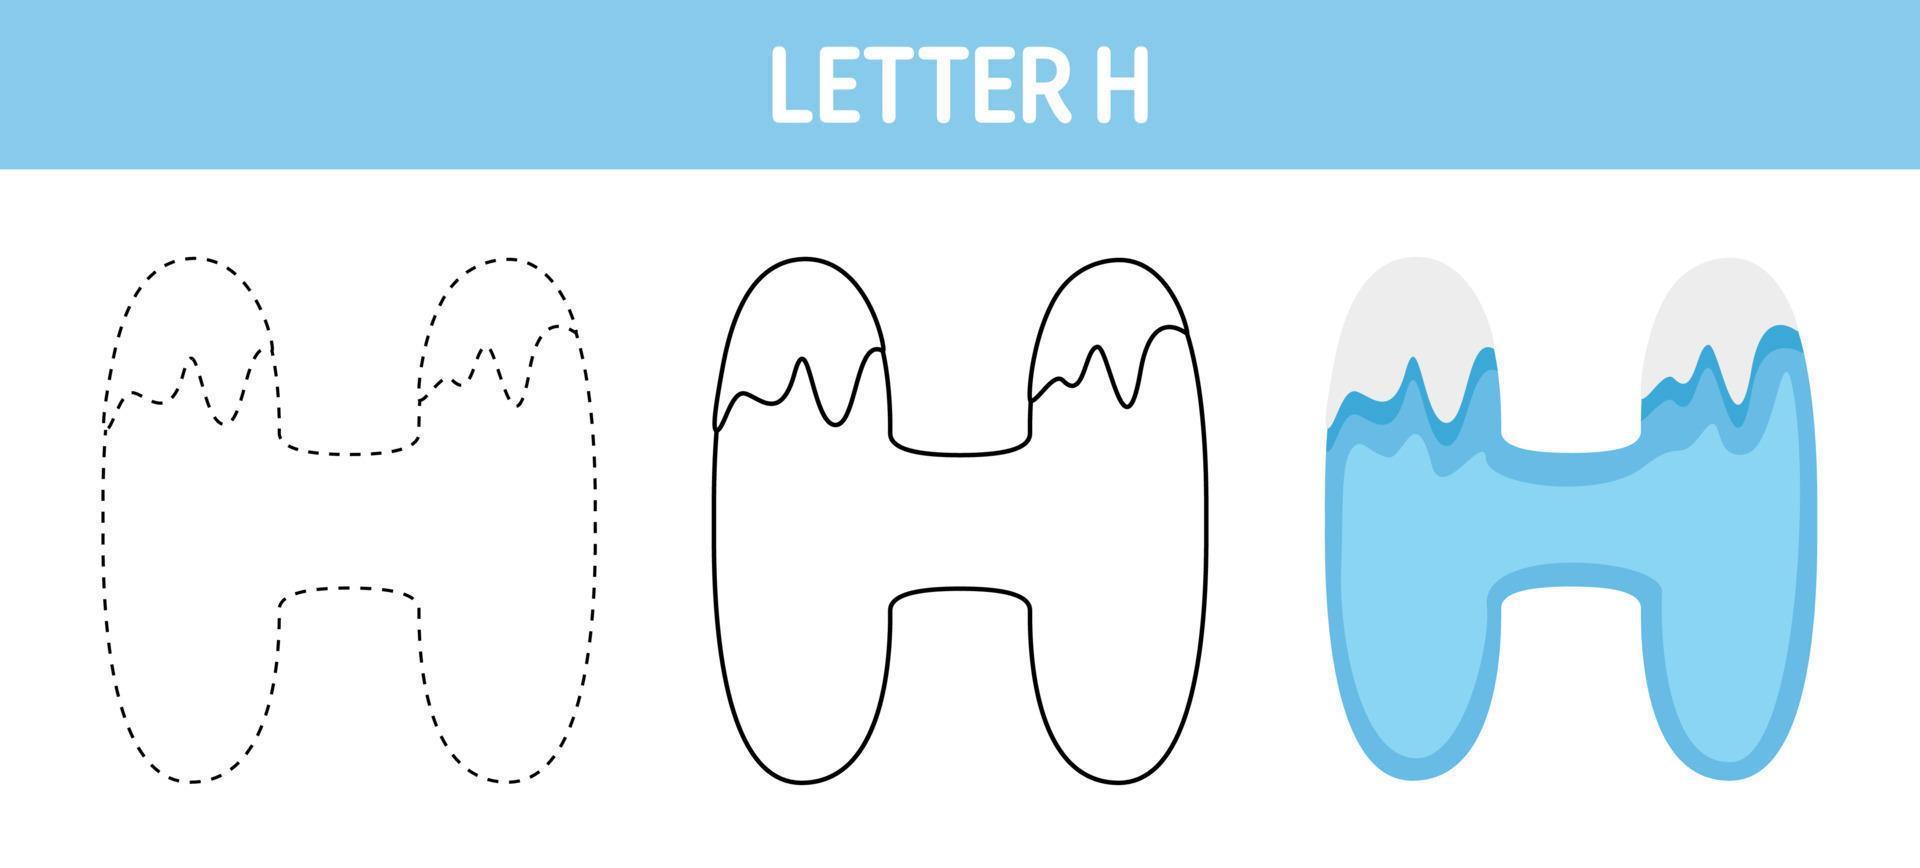 Letter H Snow tracing and coloring worksheet for kids vector